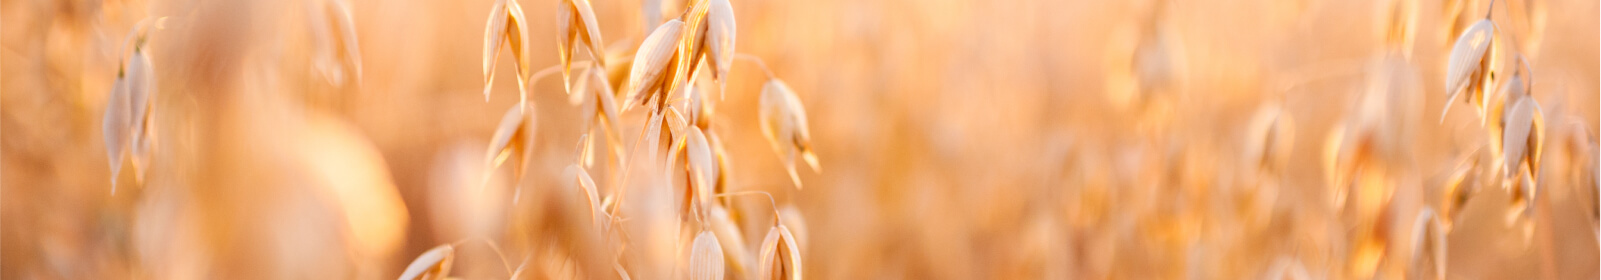 Close up view of oats in a field